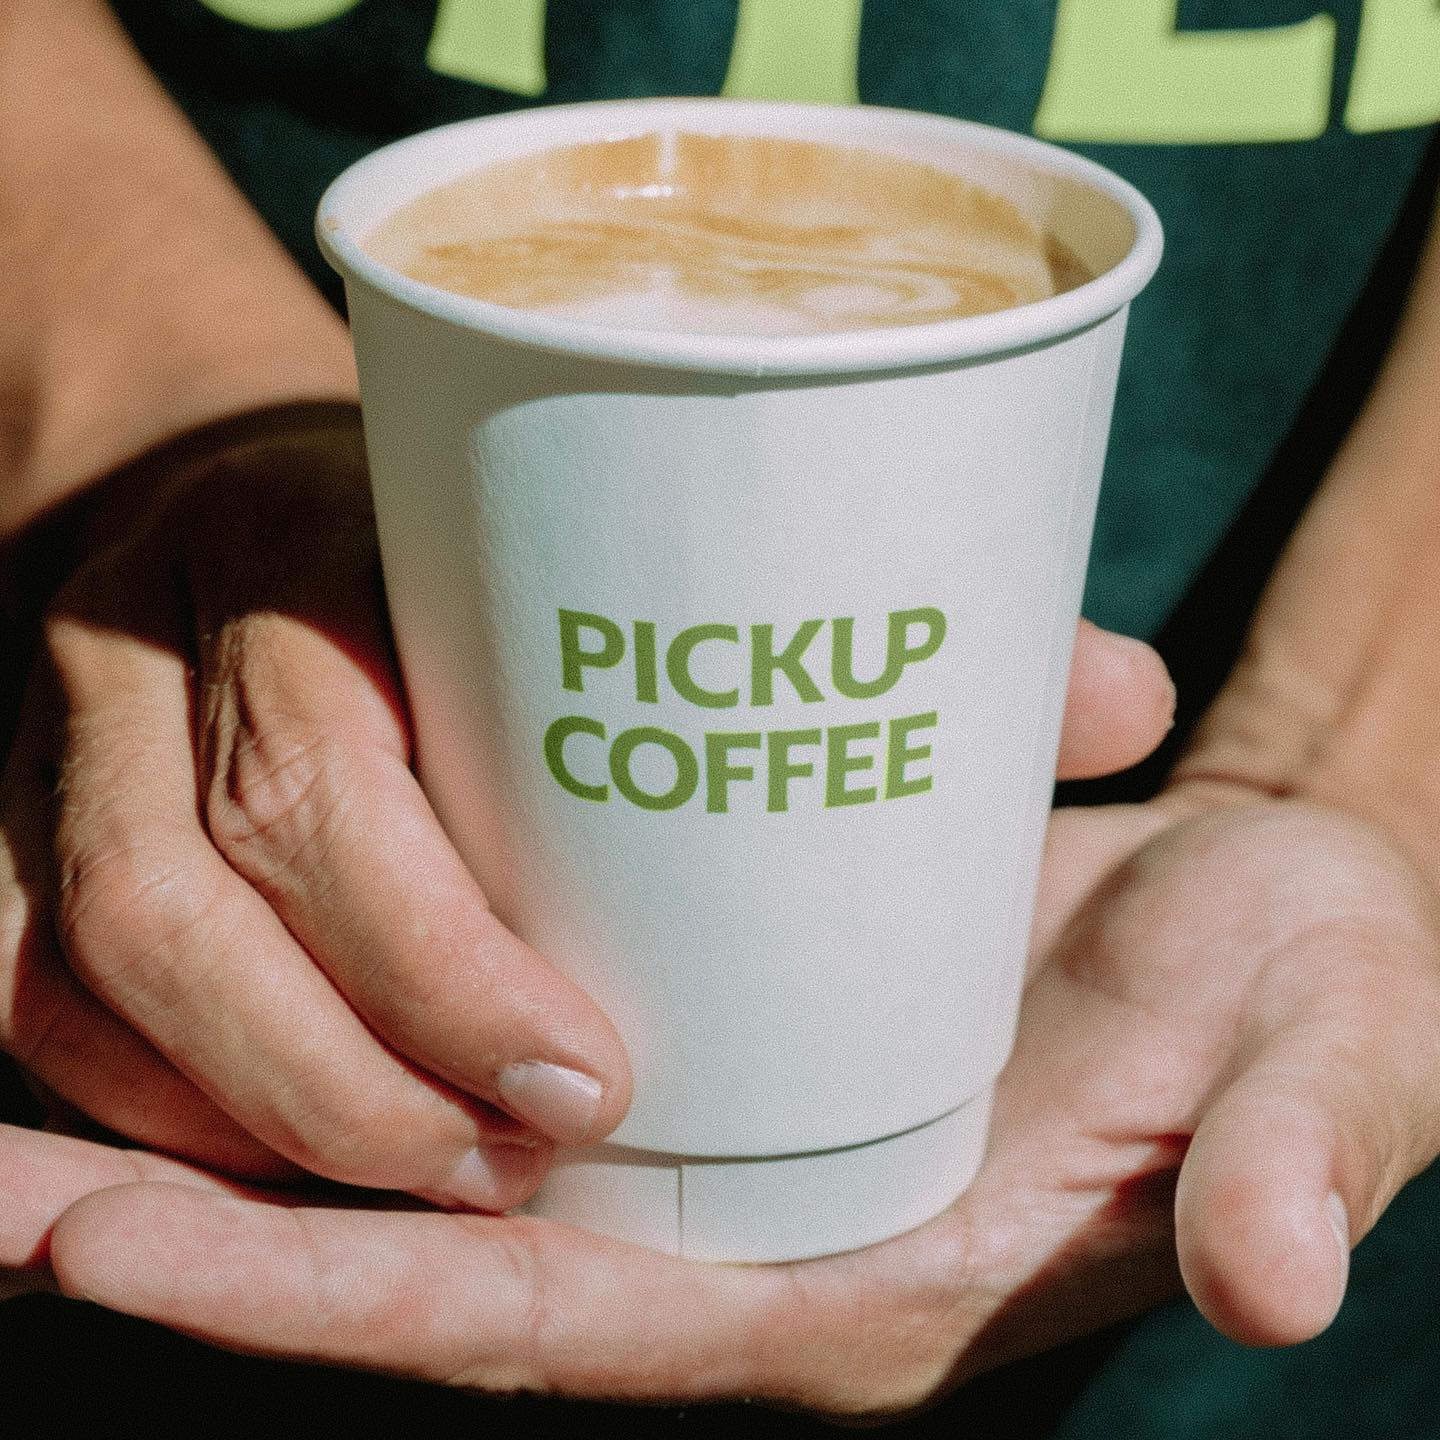 Get Launch Perks At The First Pickup Coffee Physical Store